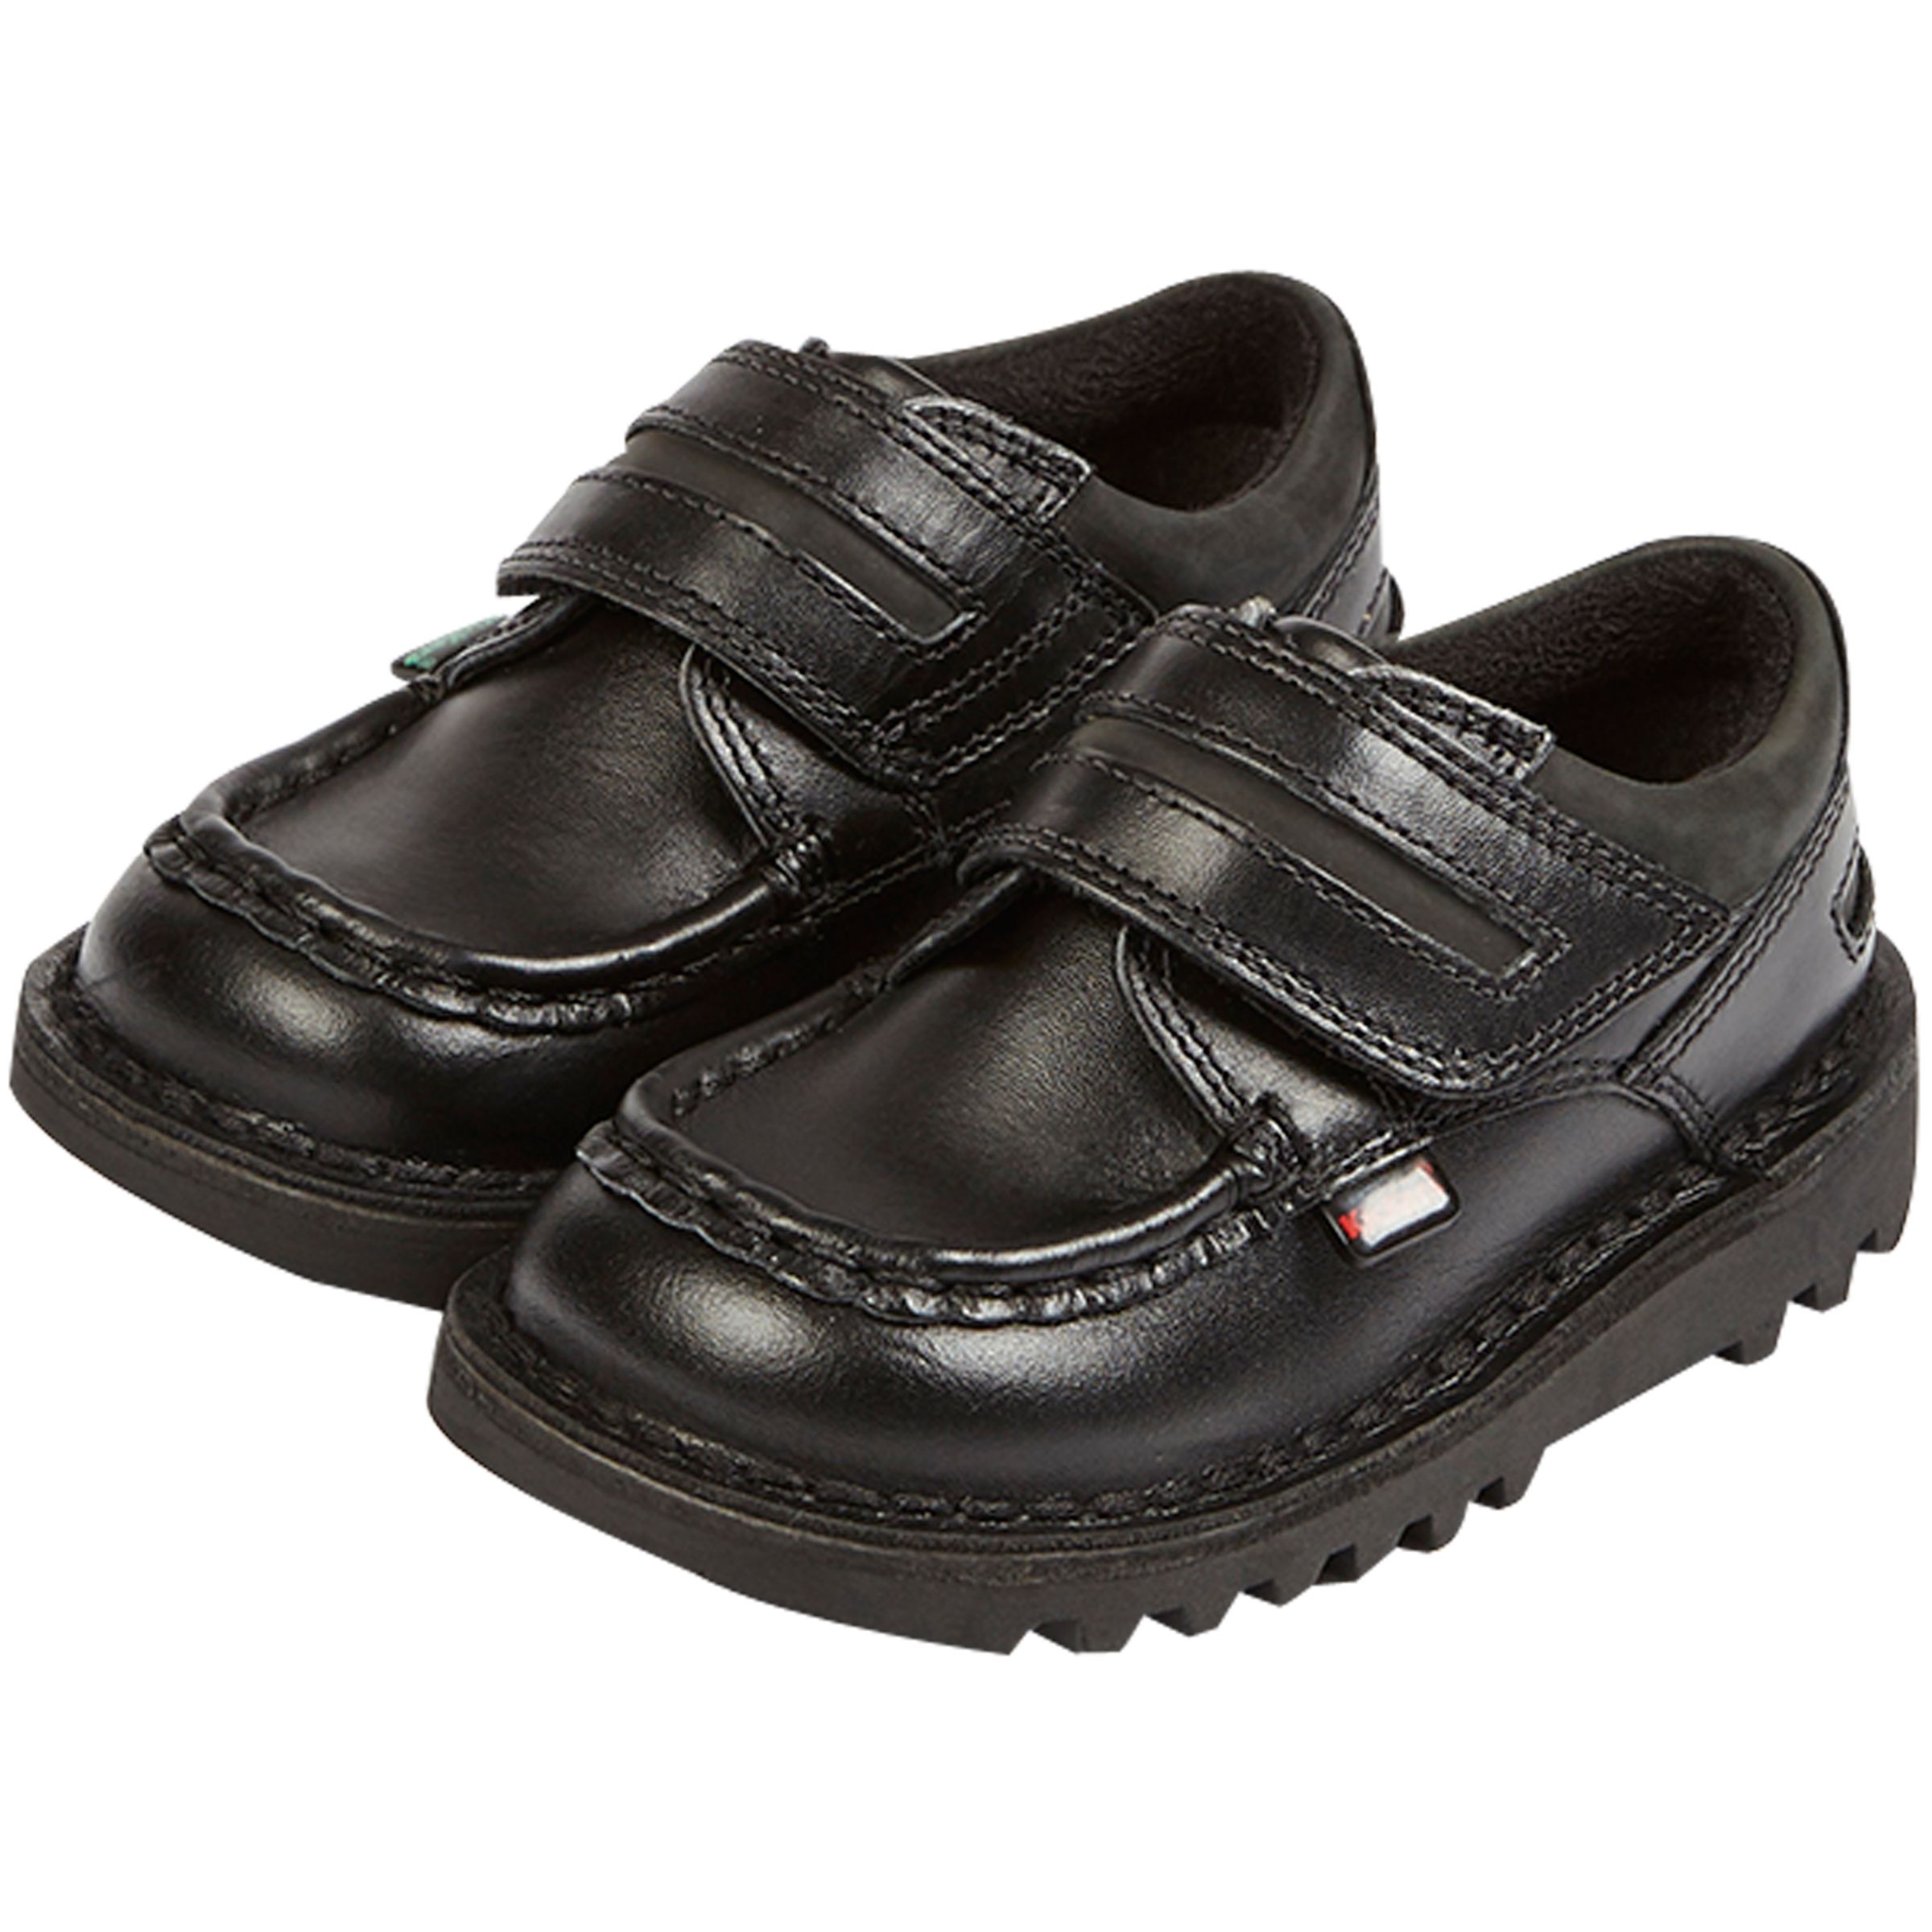 Kickers Children's Cyba Strap Leather Shoes, Black